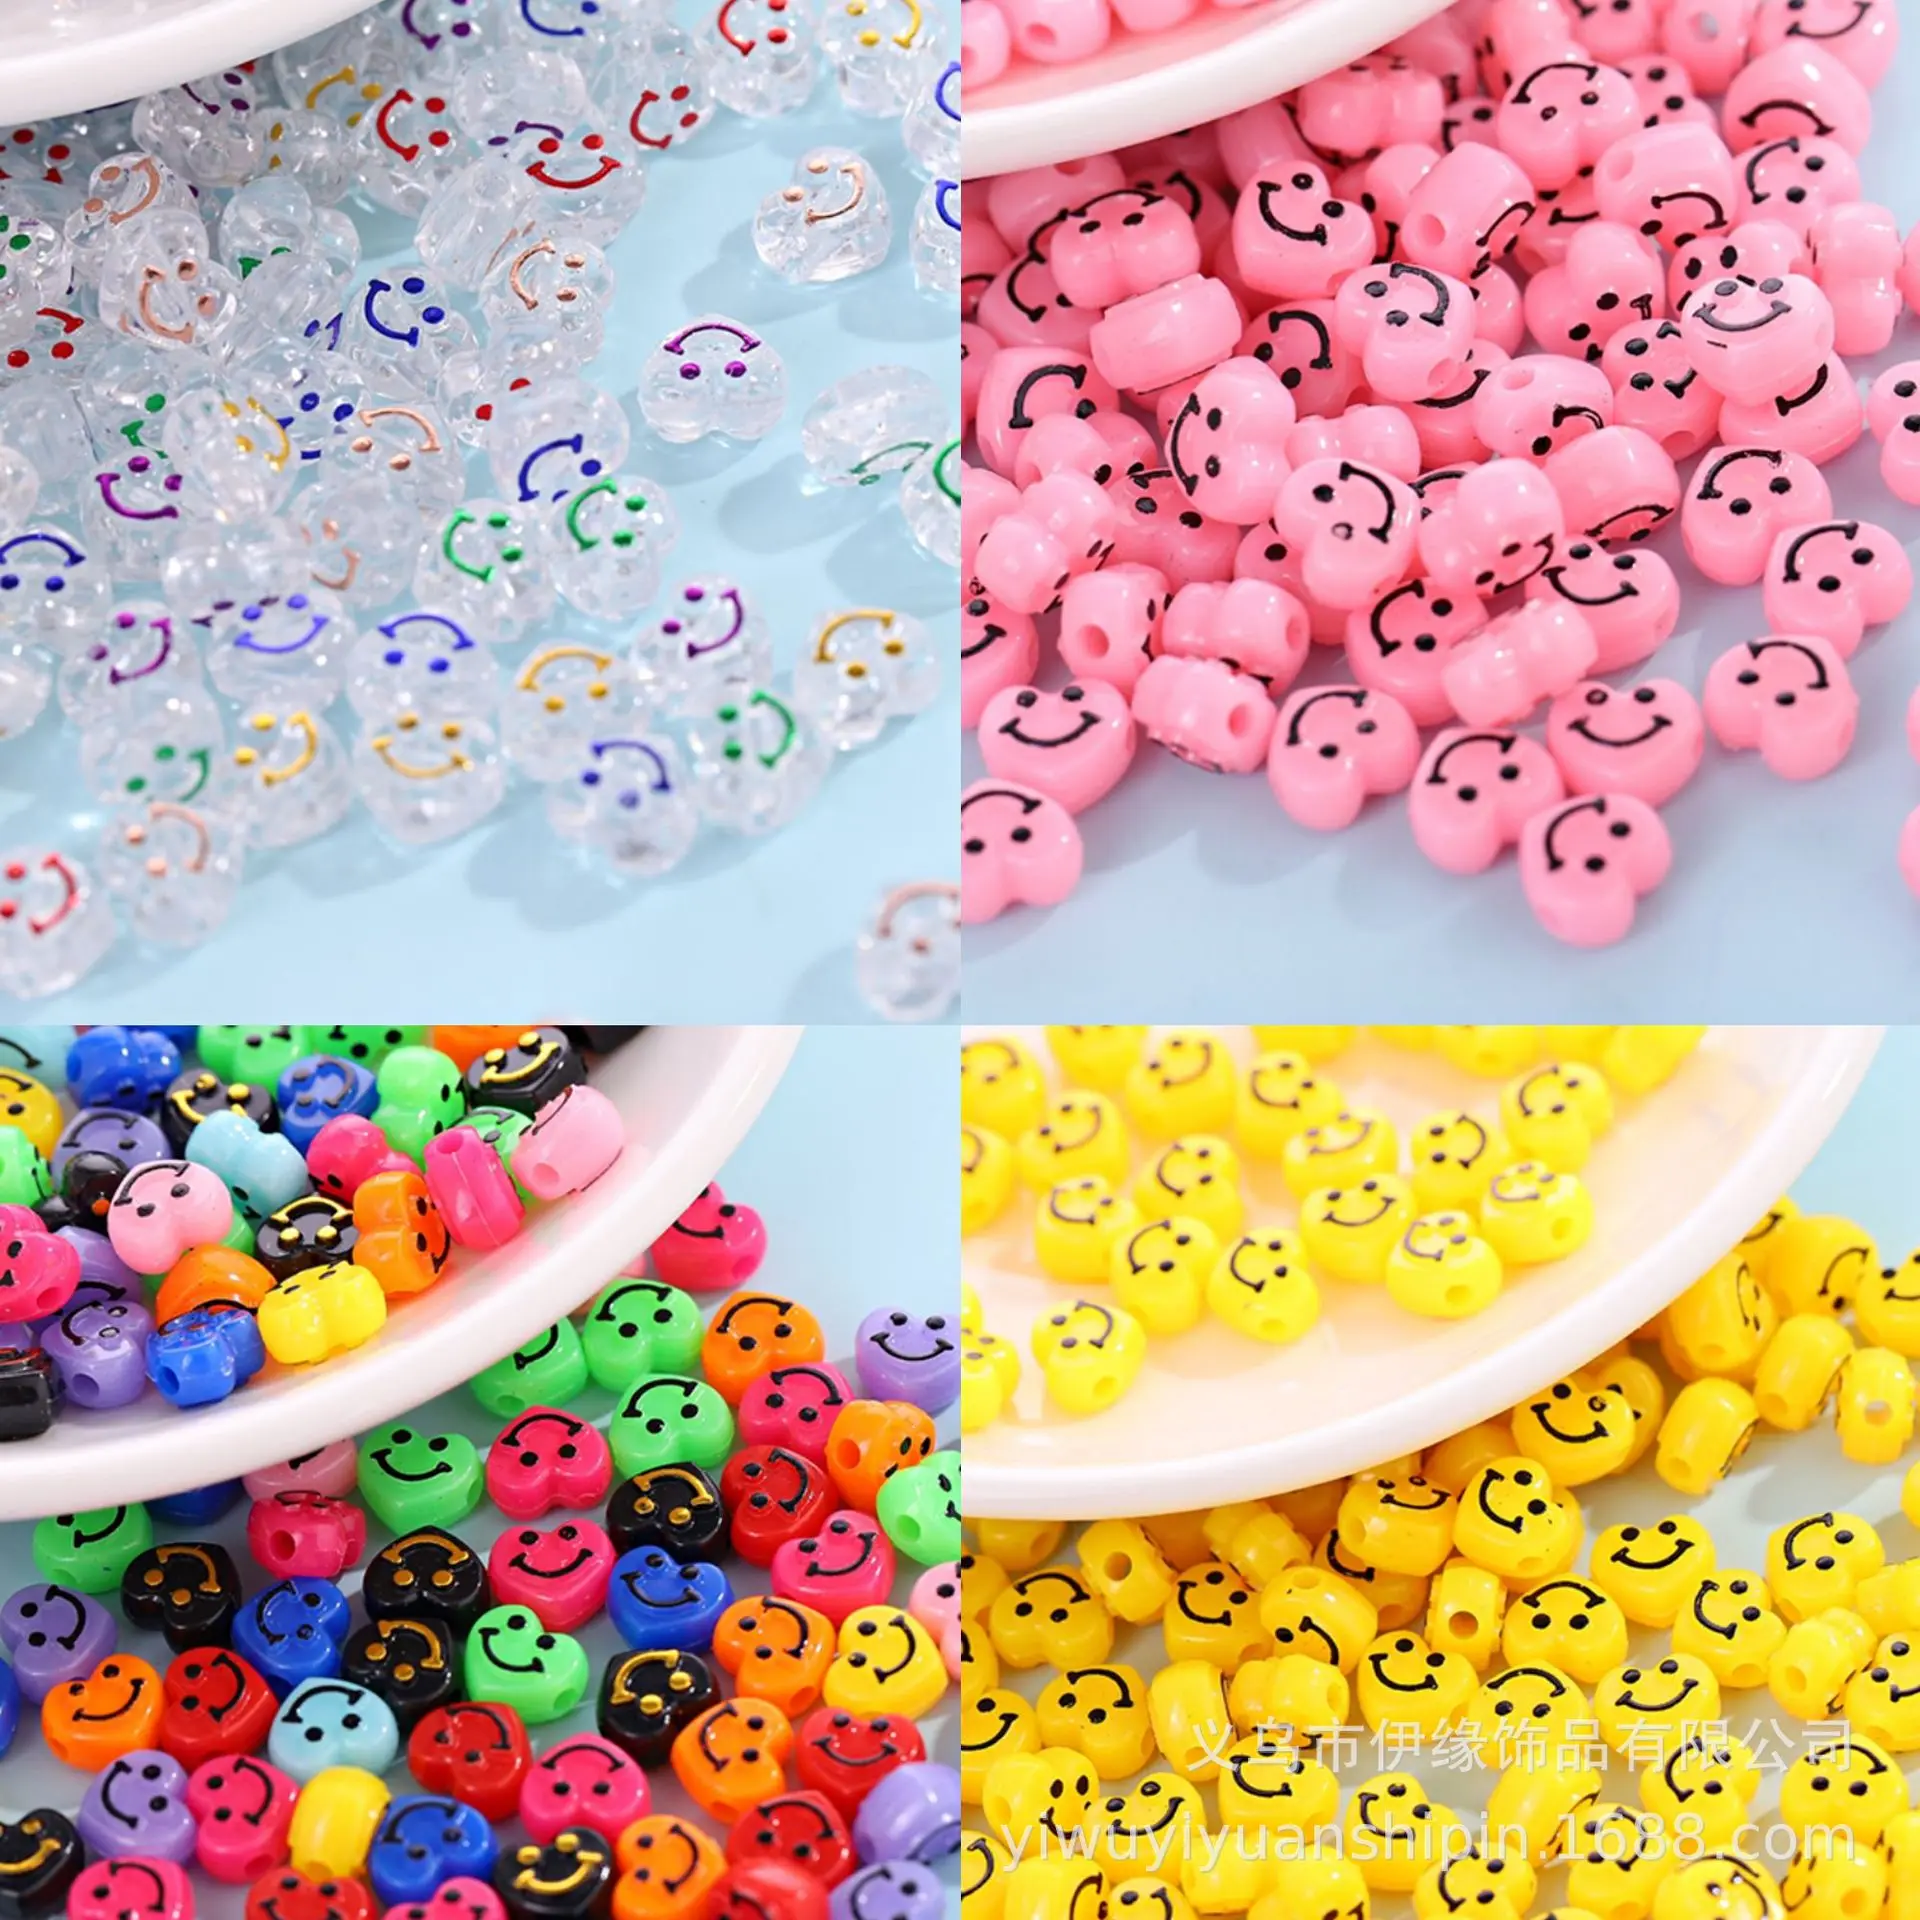 

10mm 50pcs acrylic heart-shaped smiling face beads DIY bracelet necklace accessories manual beading materials